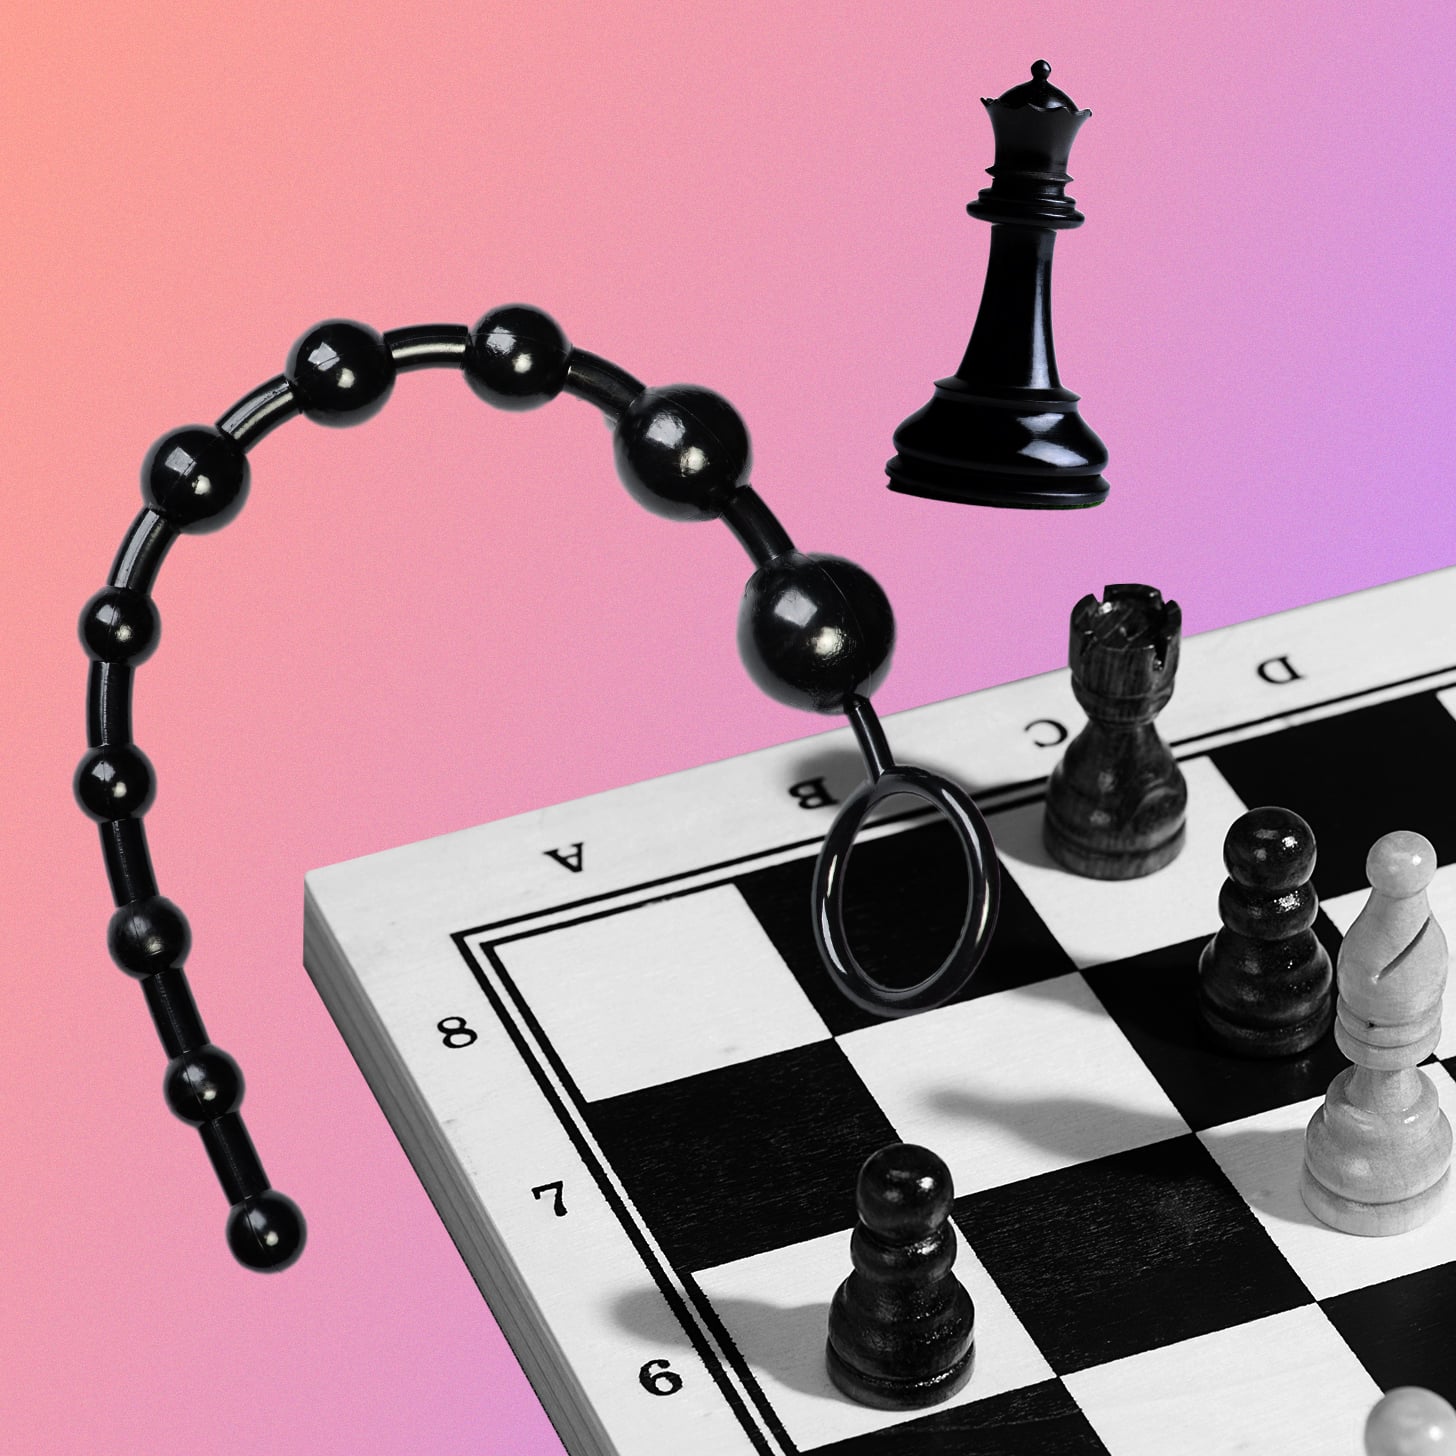 Chess world has theory on supposed cheating scandal: Anal beads